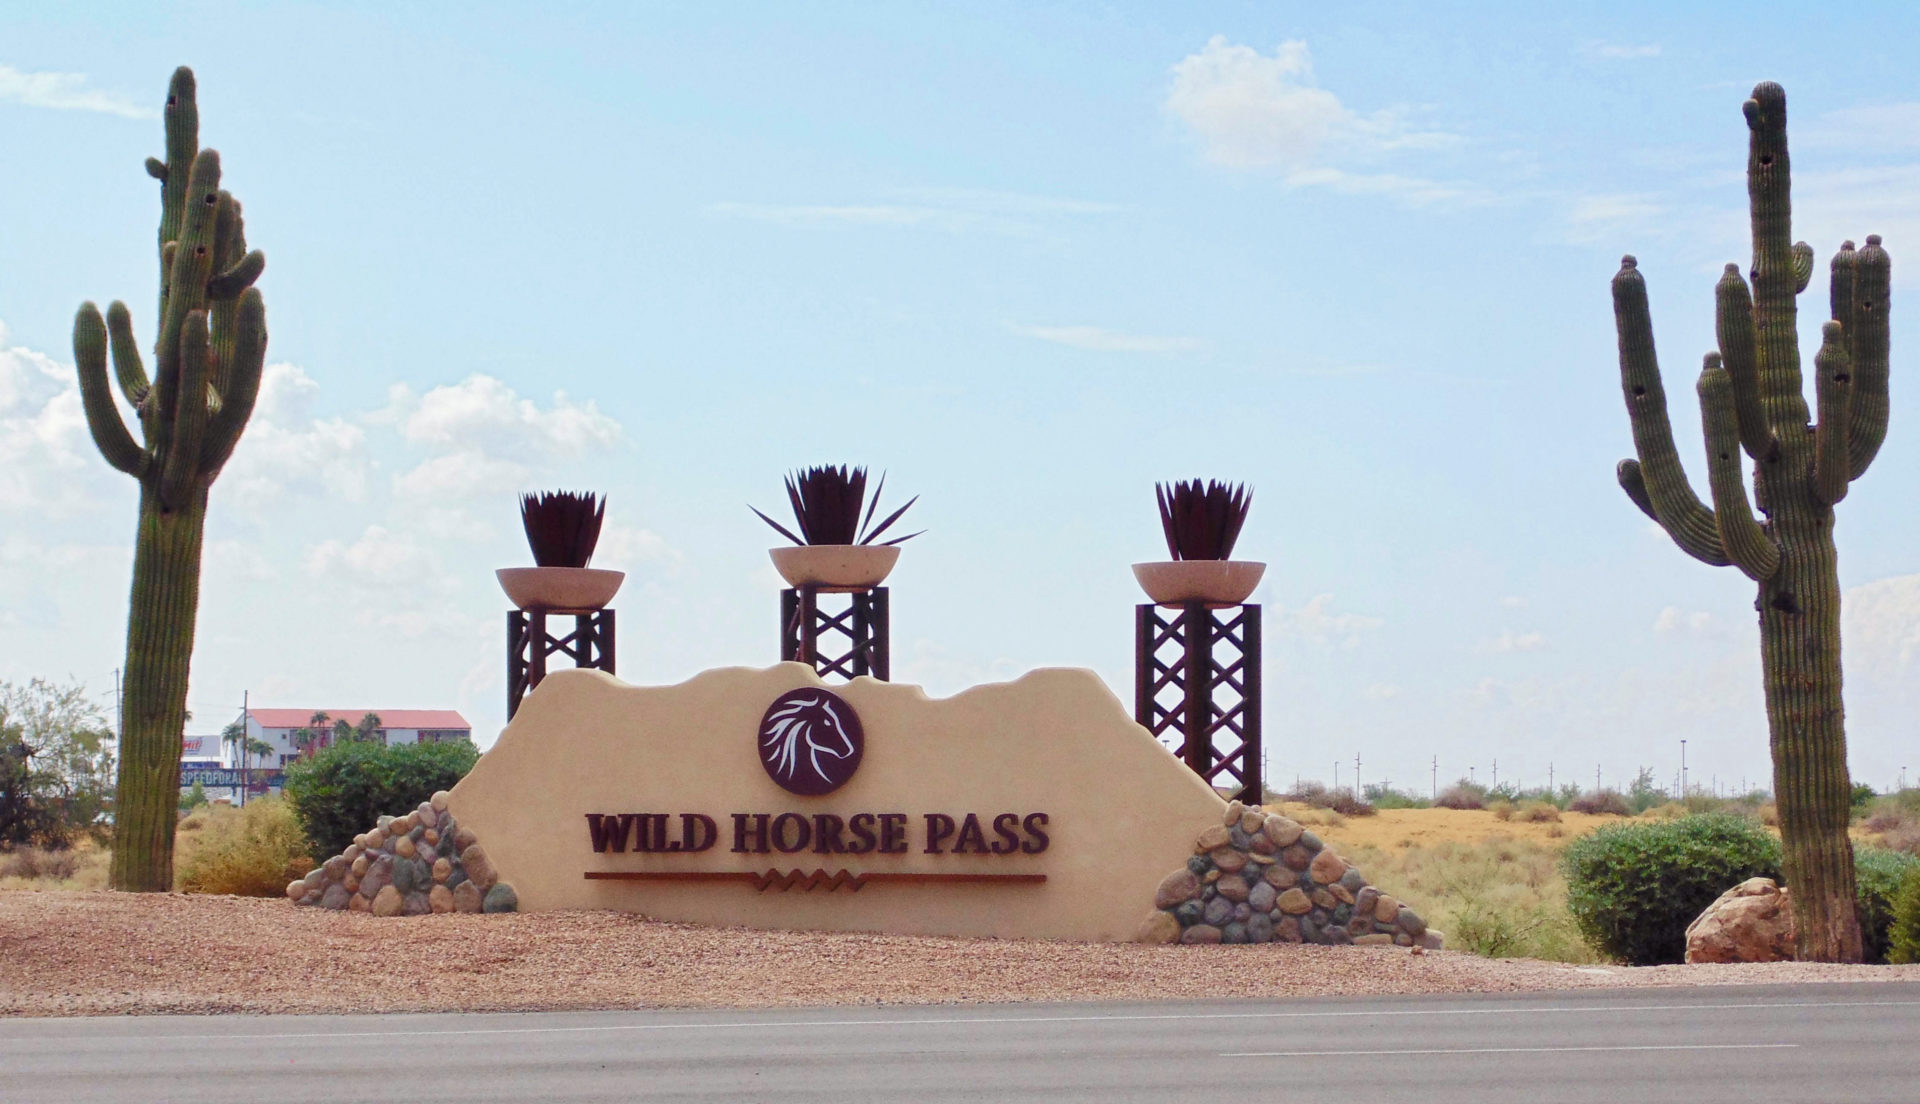 Wild Horse Pass Development Authority Partners with Sunbelt Holdings to